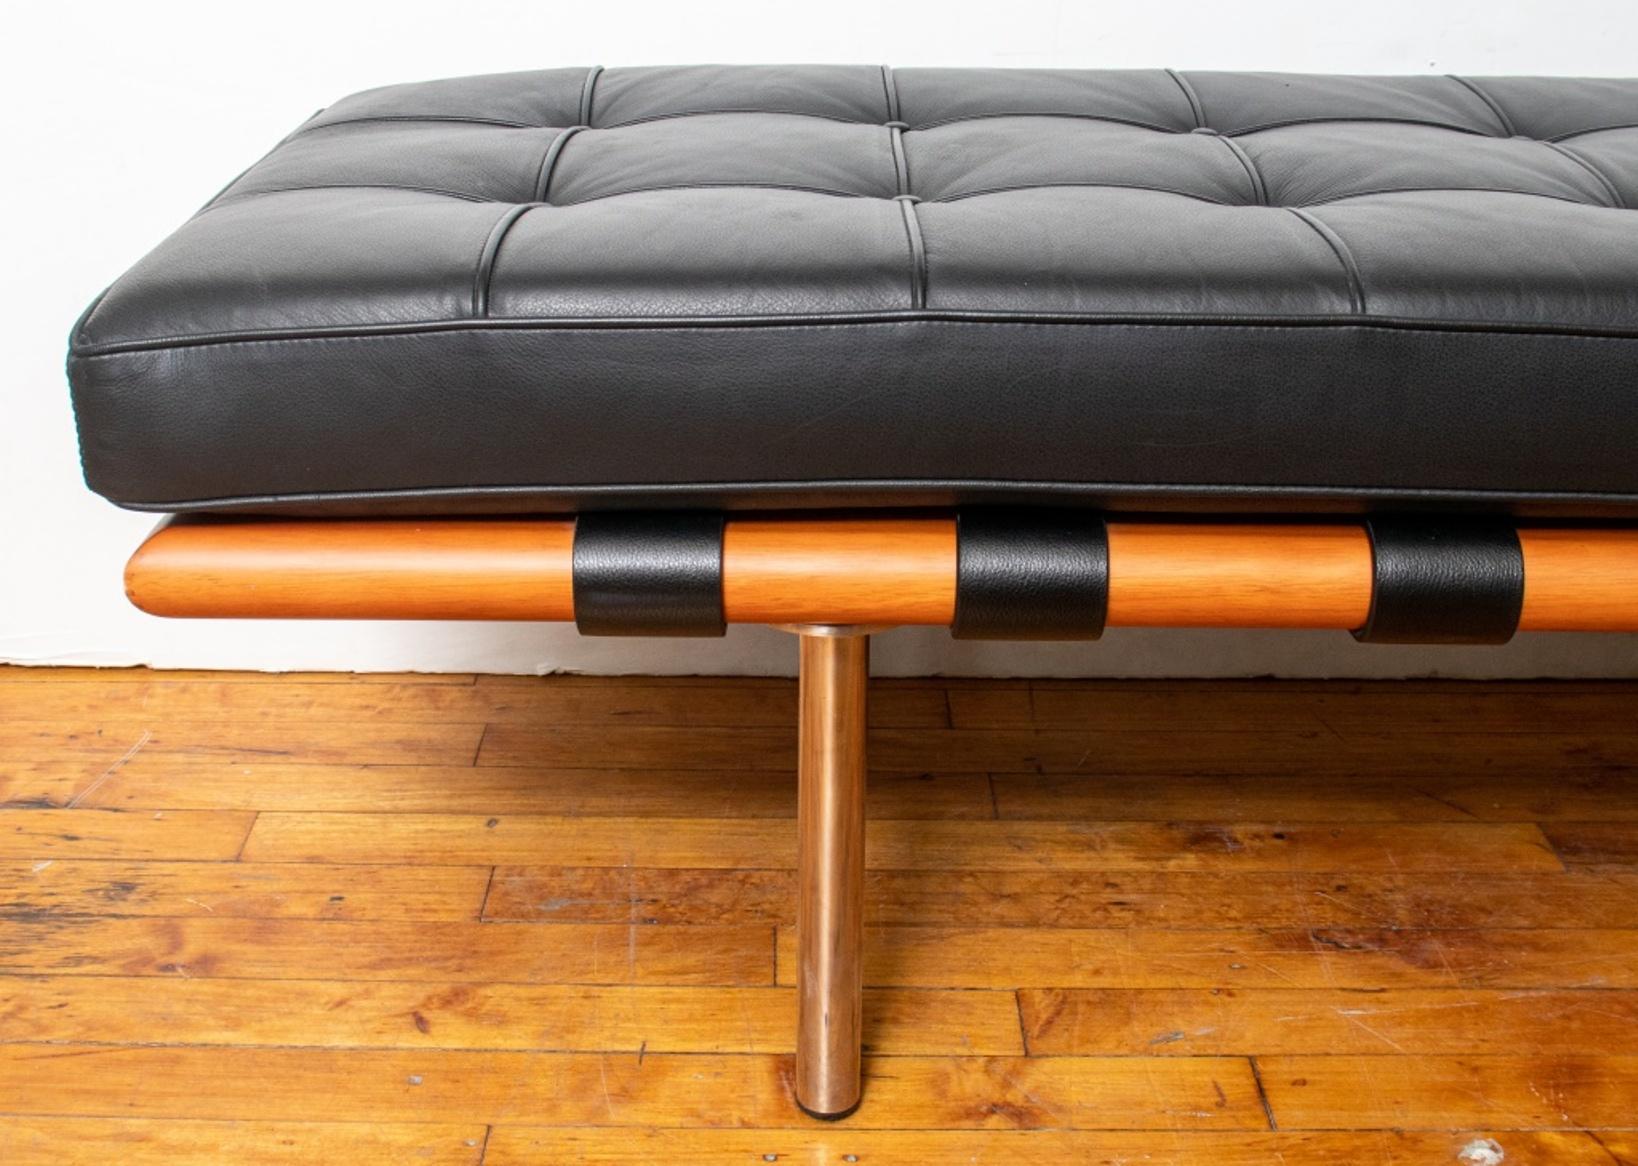 Ludwig Mies Van der Rohe (German/American, 1886-1969) manner modern stretched Barcelona bench with black leather tufted upholstered seat on metal and wood frame.

Dimensions: 16.5